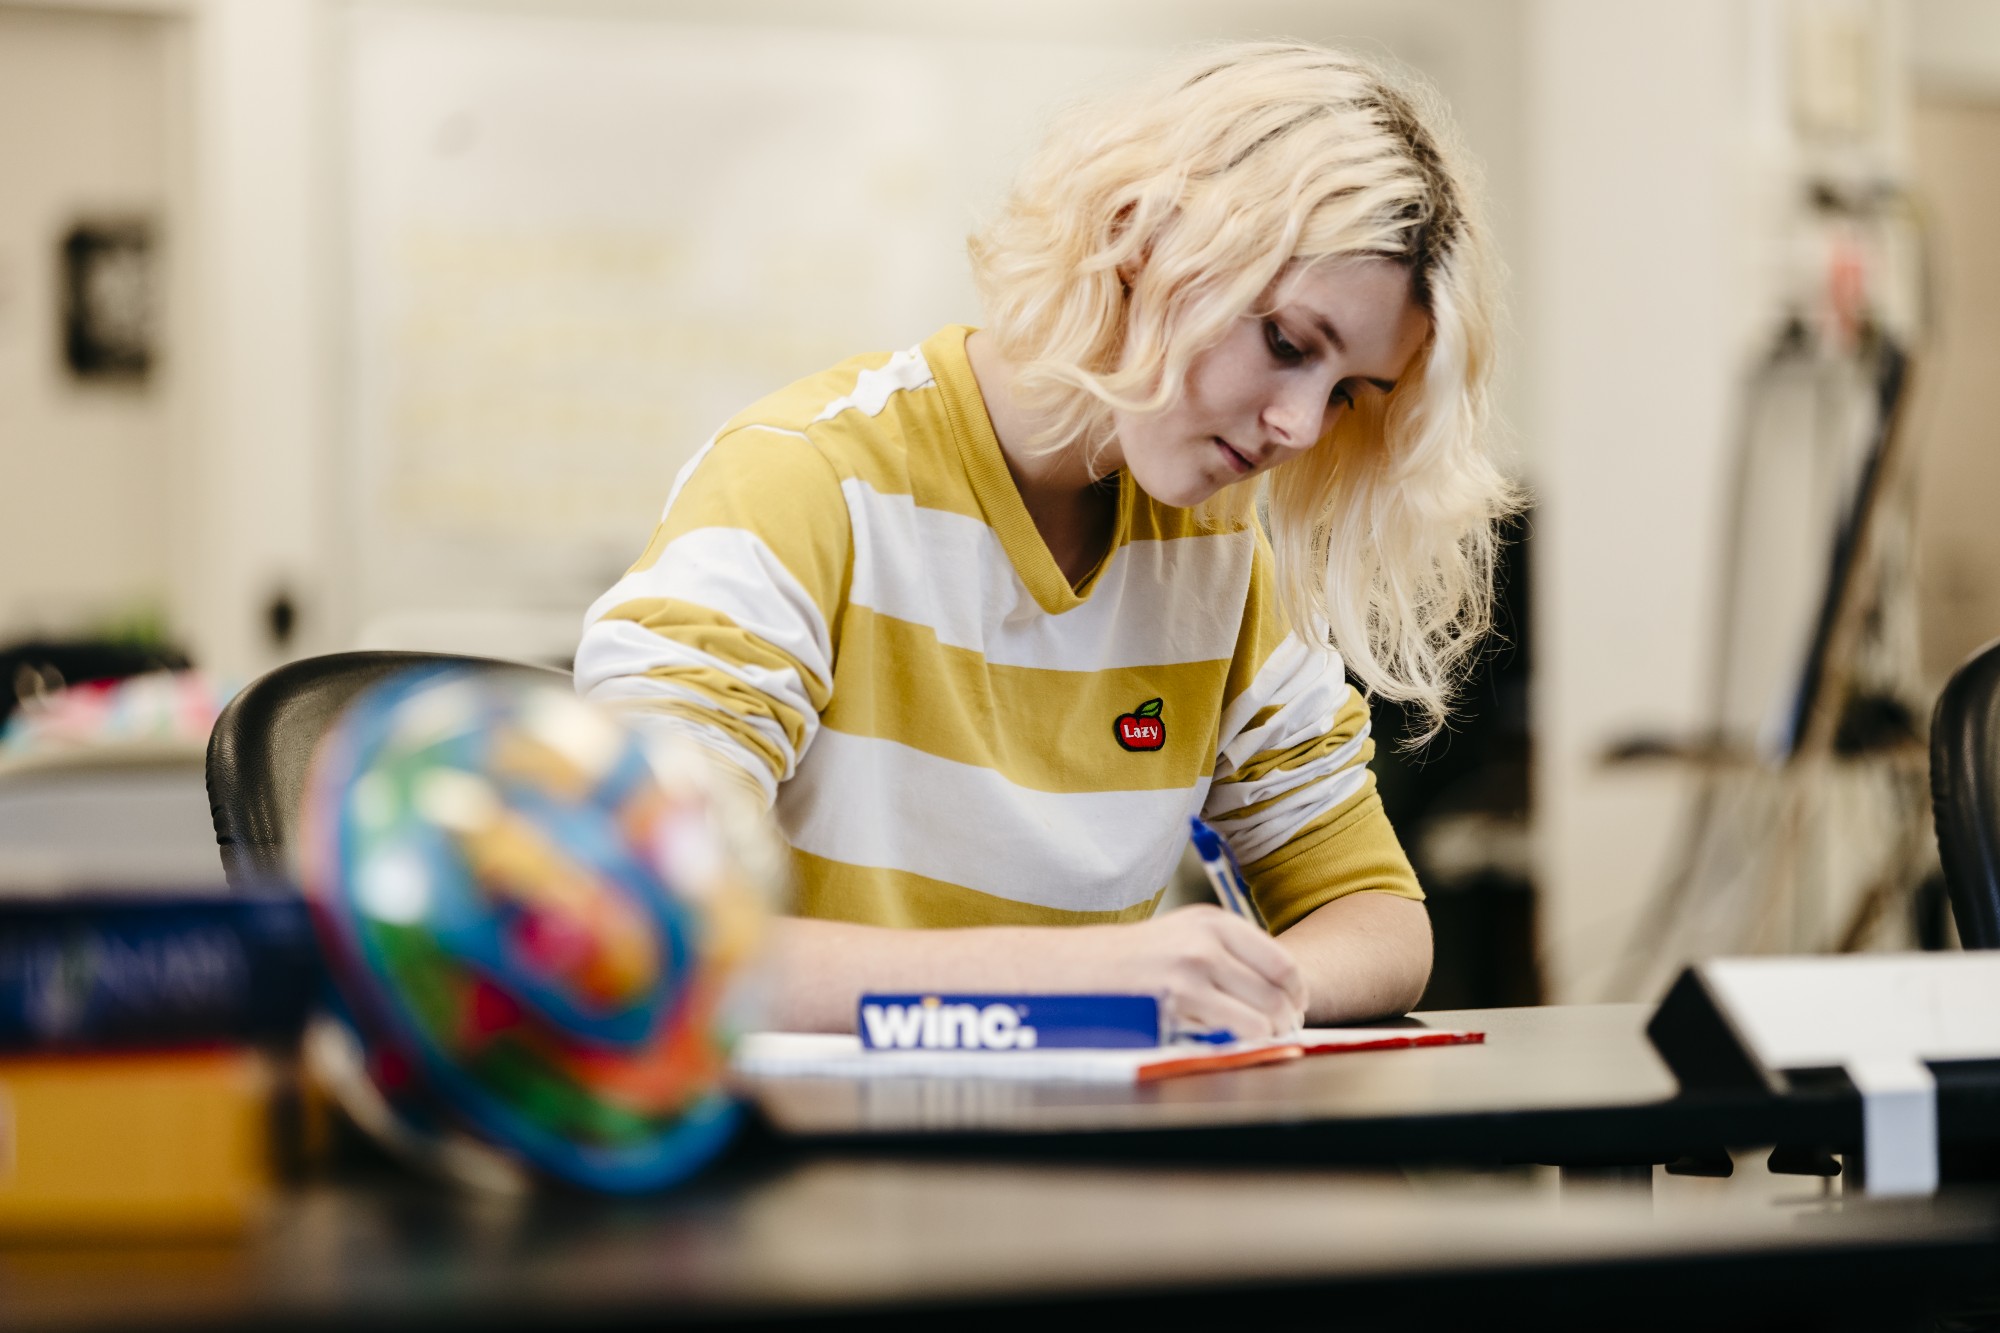 Person wearing a yellow striped shirt writing on paper while sitting at a desk.